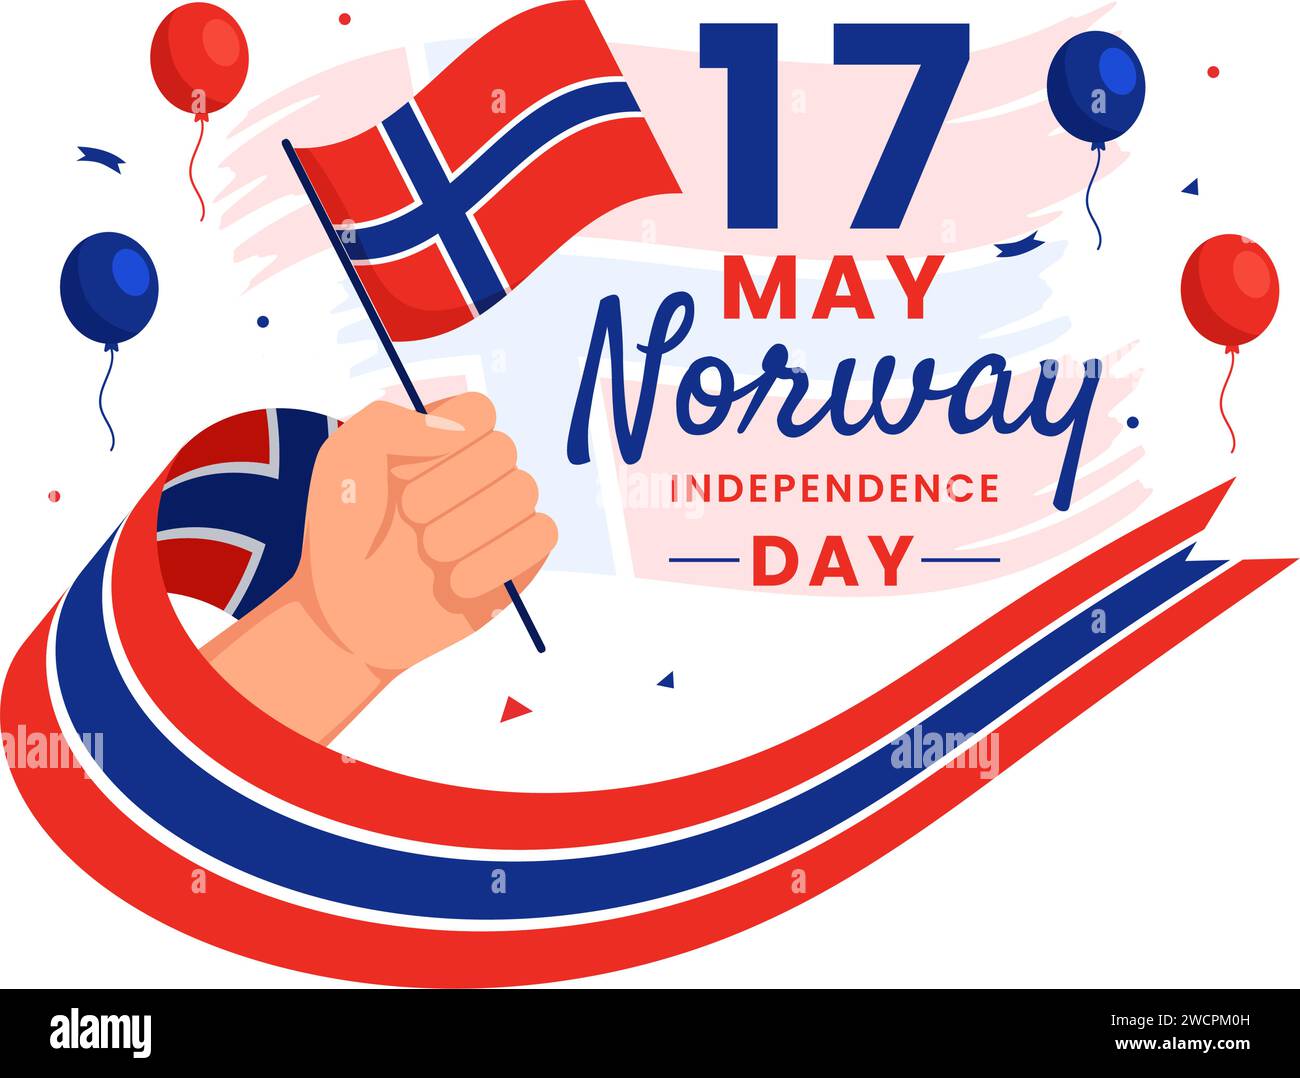 Norway Independence Day Vector Illustration on May 17 with Flag of Norwegian and Ribbon in National Holiday Celebration Flat Cartoon Background Stock Vector